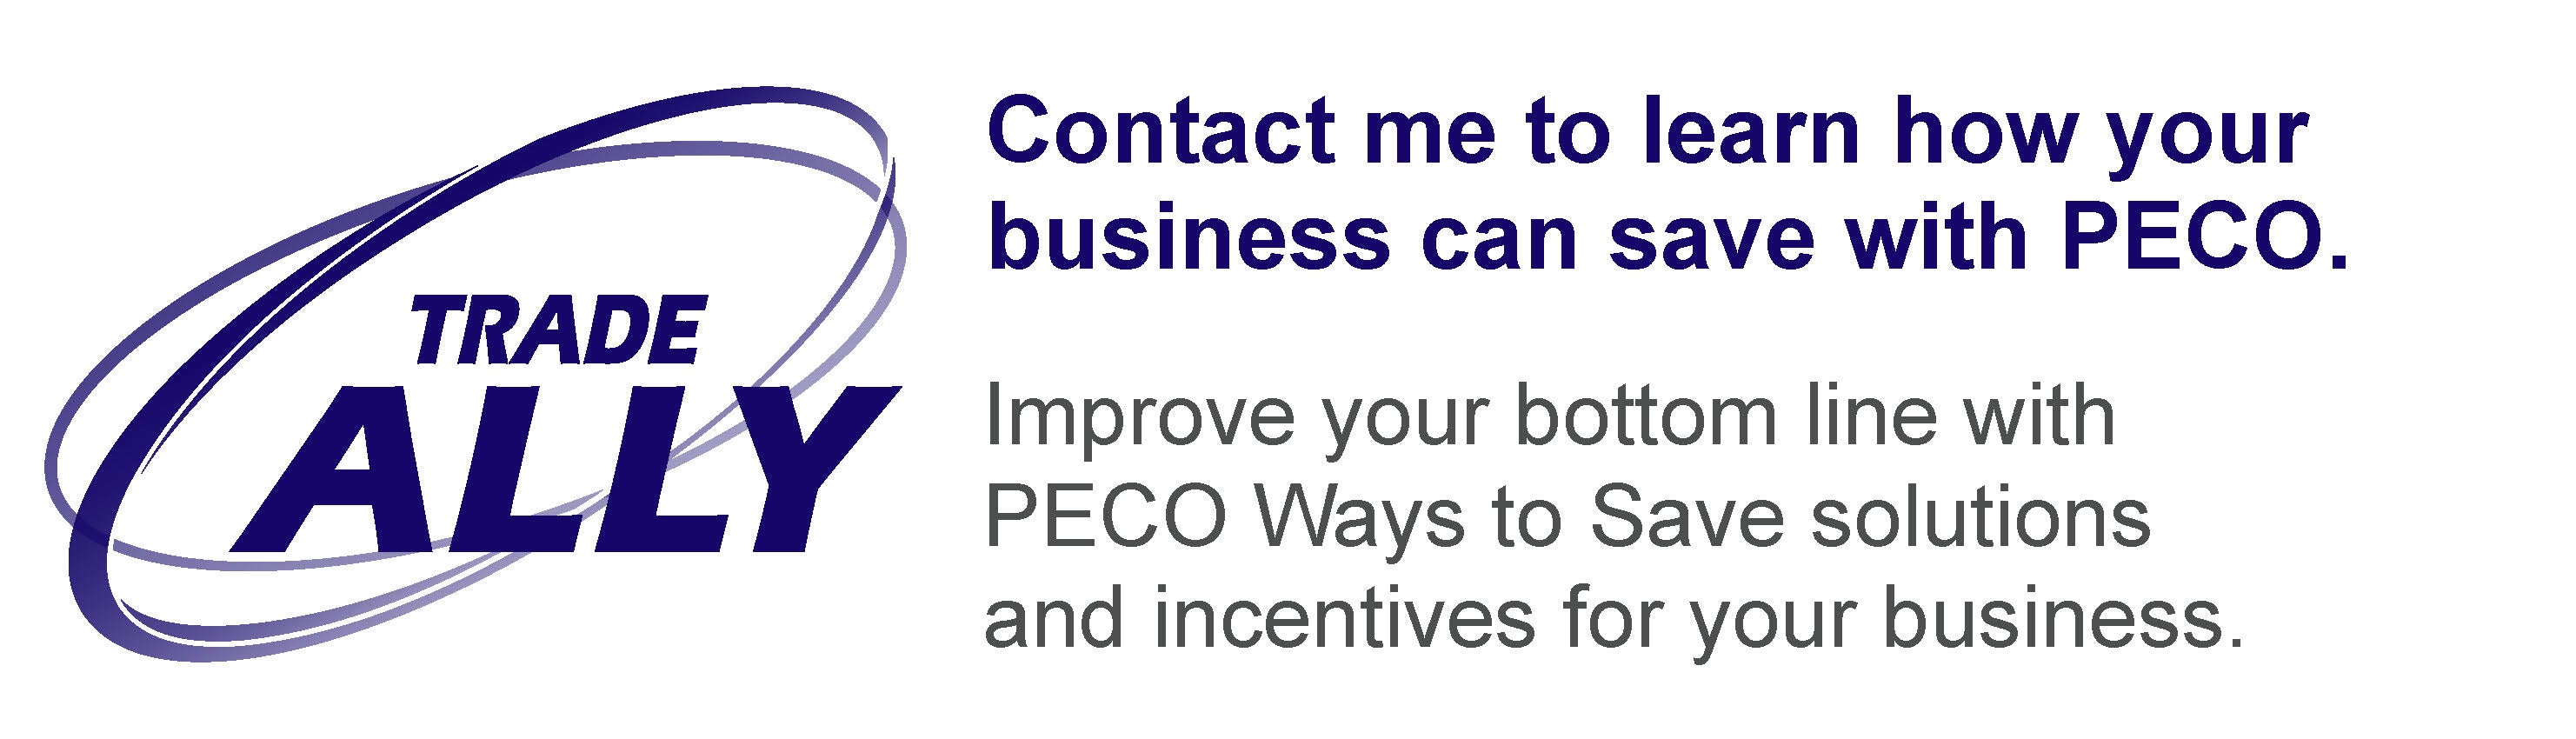 PECO Trade Ally - Contact us to learn how your business can save with PECO. Improve your bottom line with PECO Ways to Save solutions and incentives for your business.